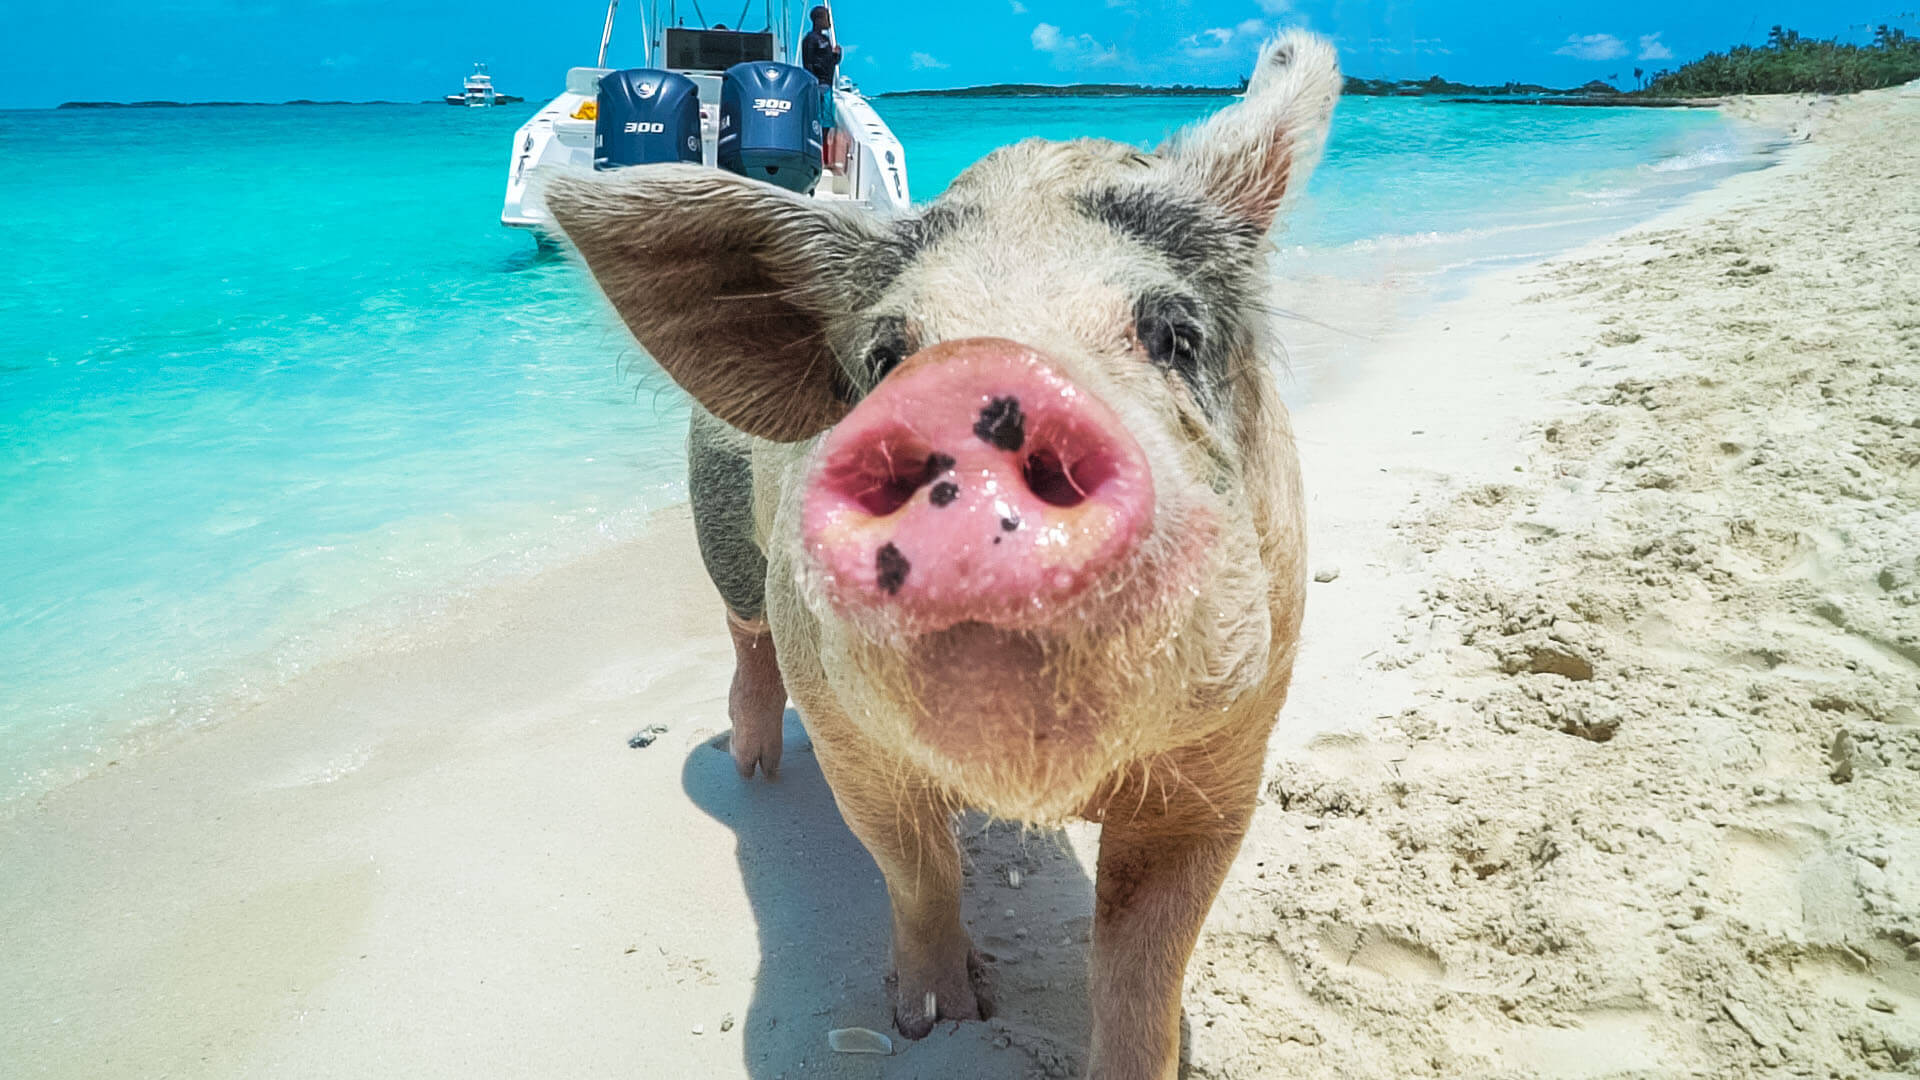 Pig close up shot on Pig Beach in The Exumas. One of the best things to do in Exuma